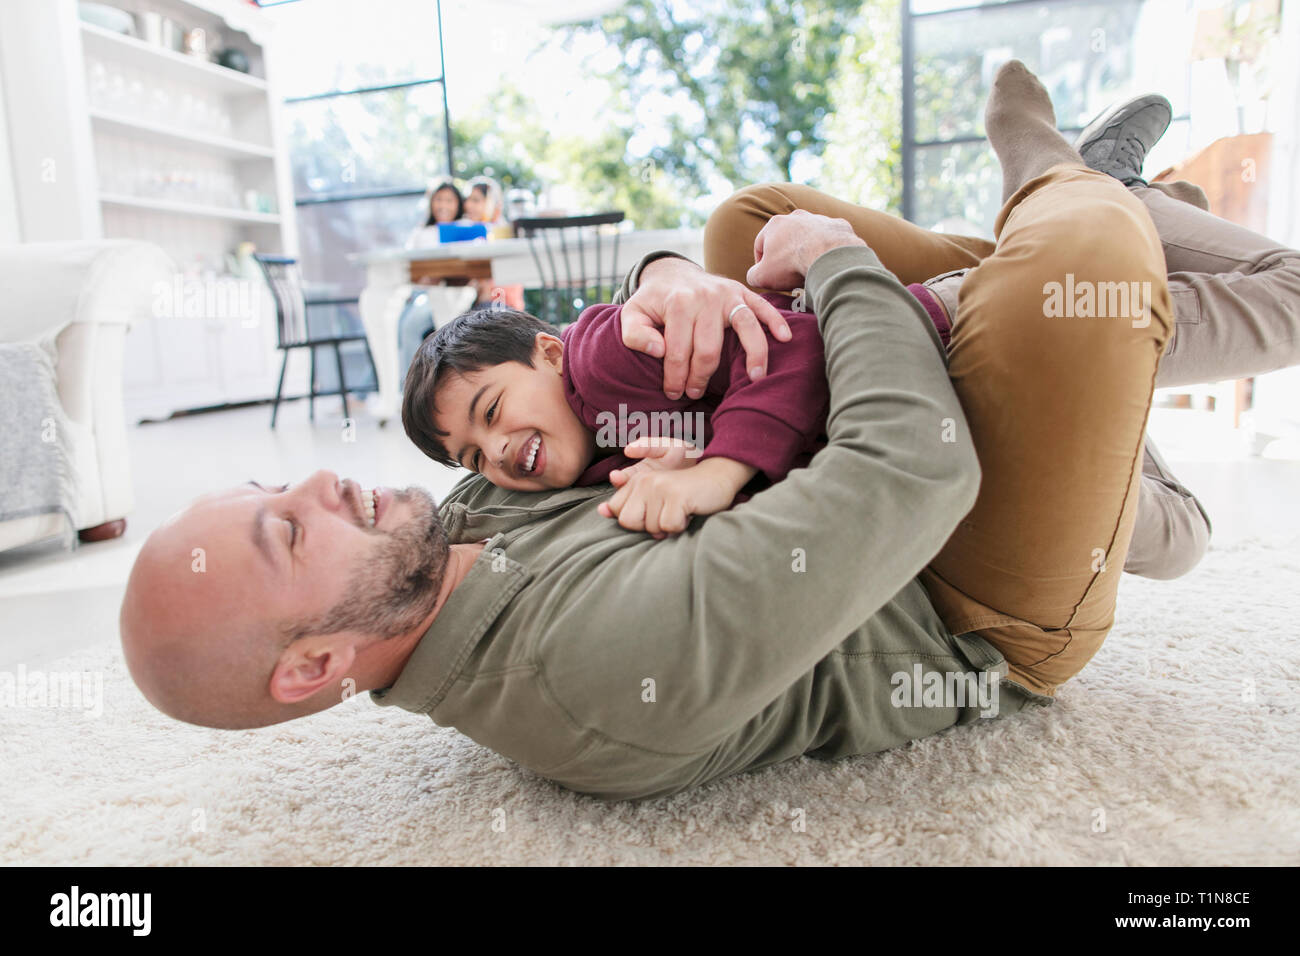 Playful father and son hugging on floor Stock Photo